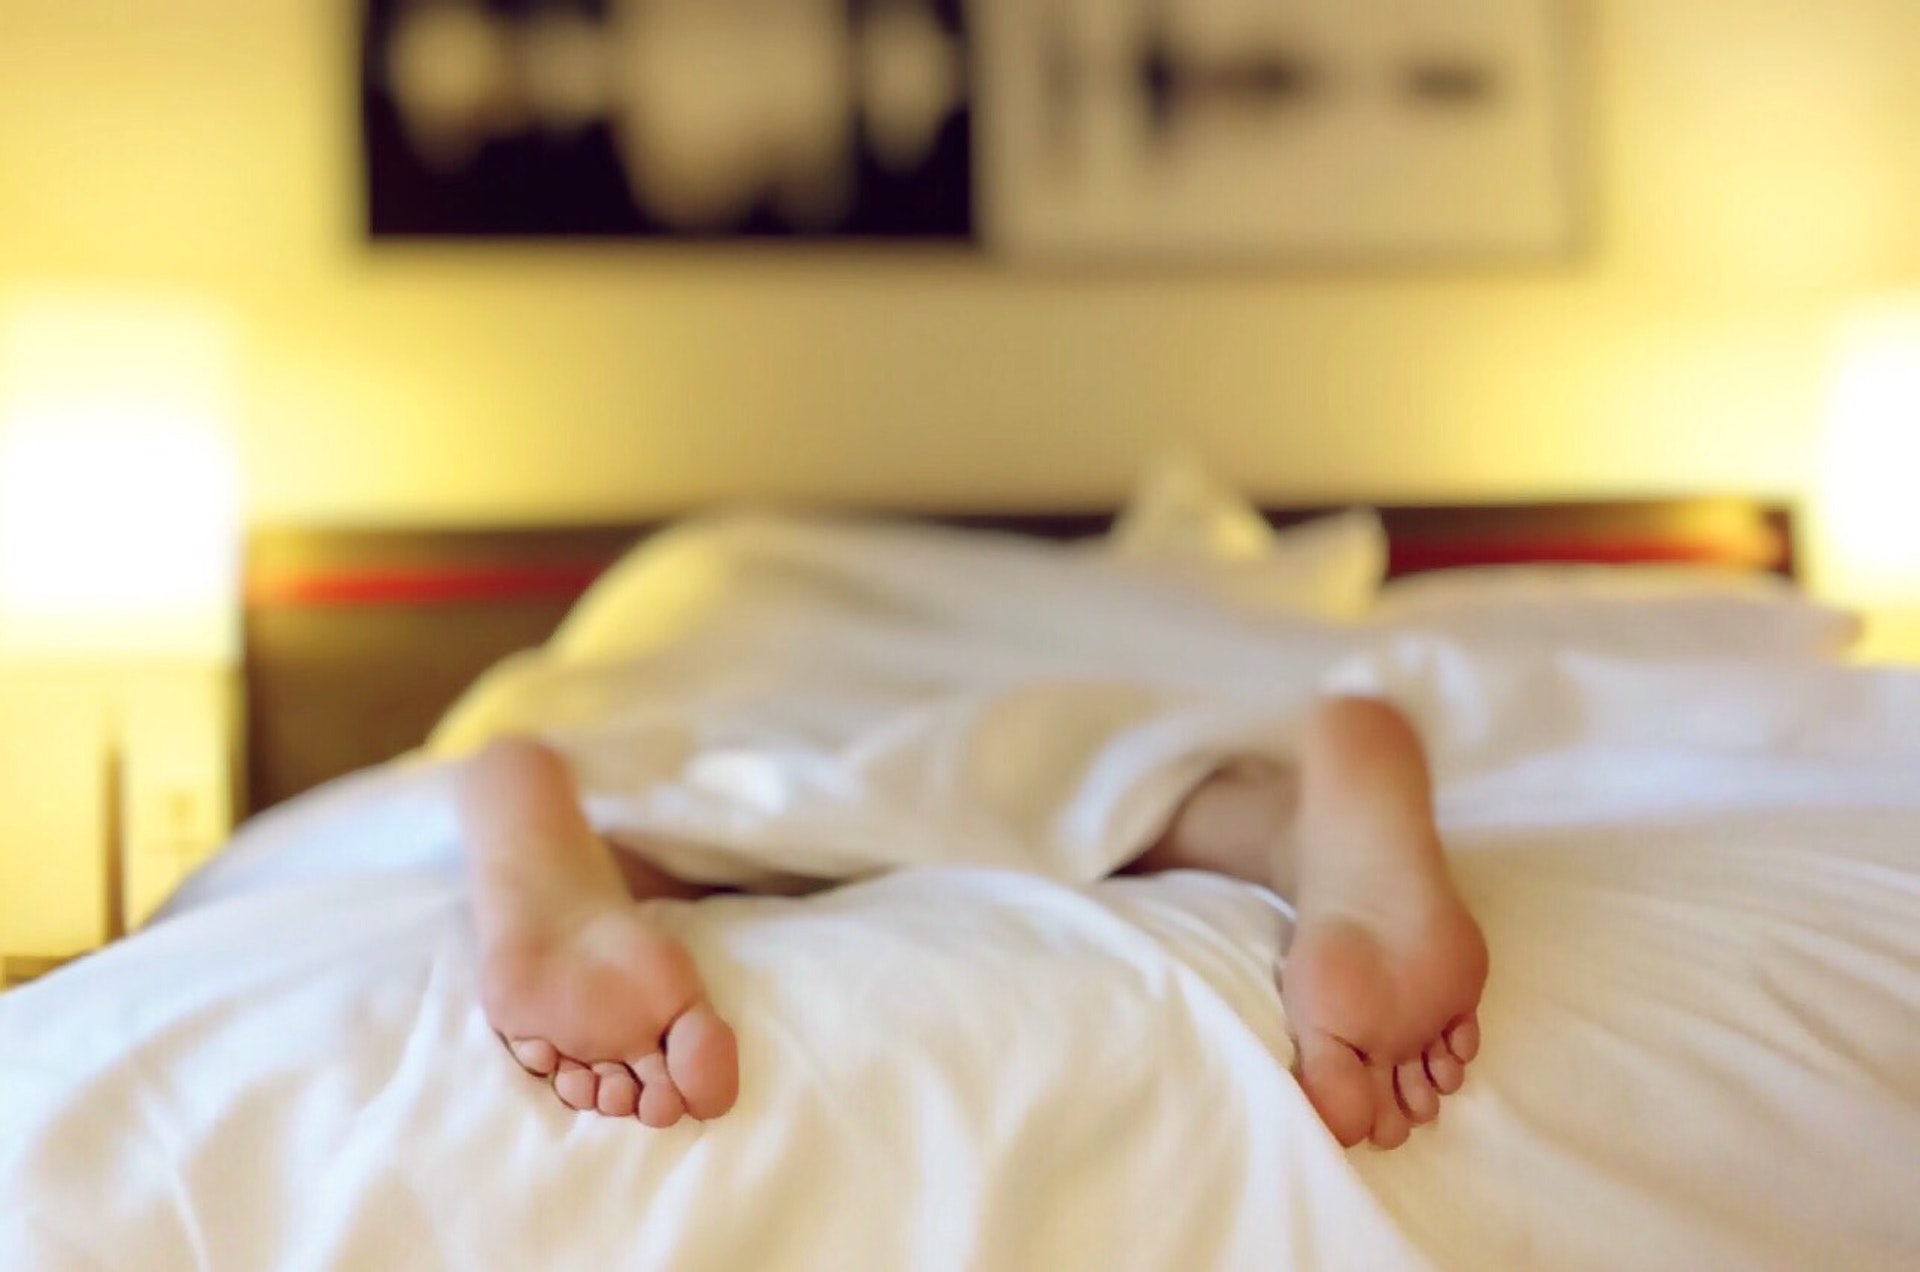 Person with their feet visible lying in bed very fatigued